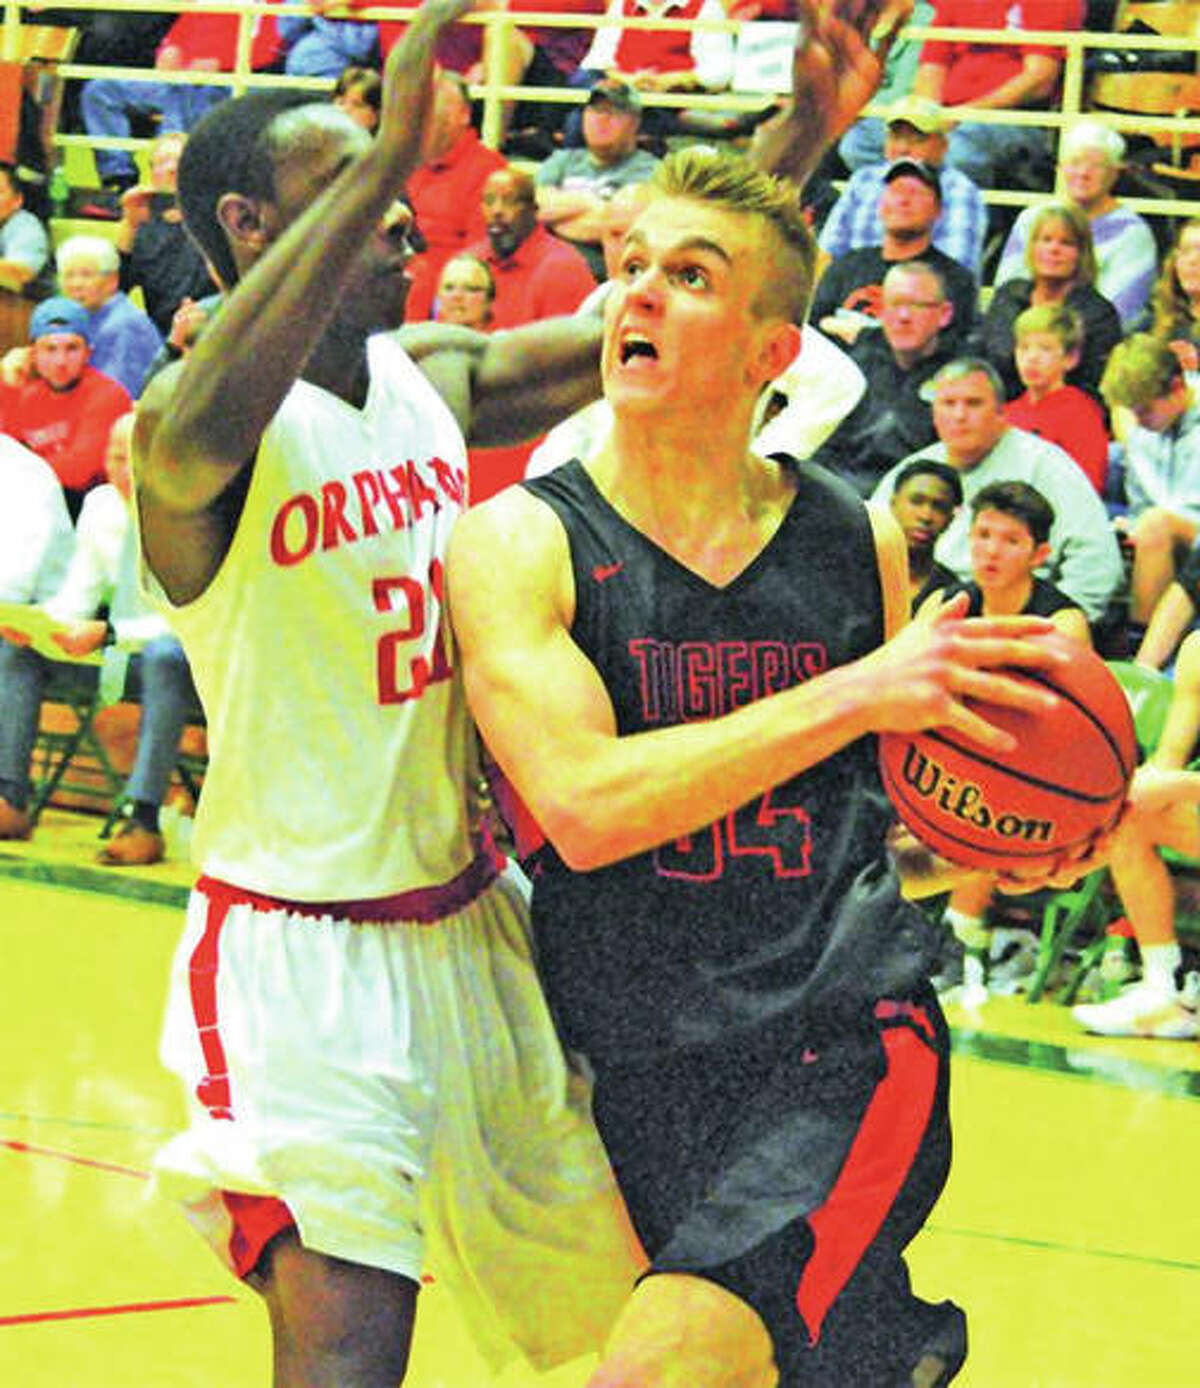 Edwardsville’s Caleb Strohmeier (right) drives to the basket during the fourth quarter of Saturday’s championship game against the Centralia Orphans at the Salem Tournament. Invitational. Strohmeier scored a game-high 24 points, but the Tigers lost the game 76-53.